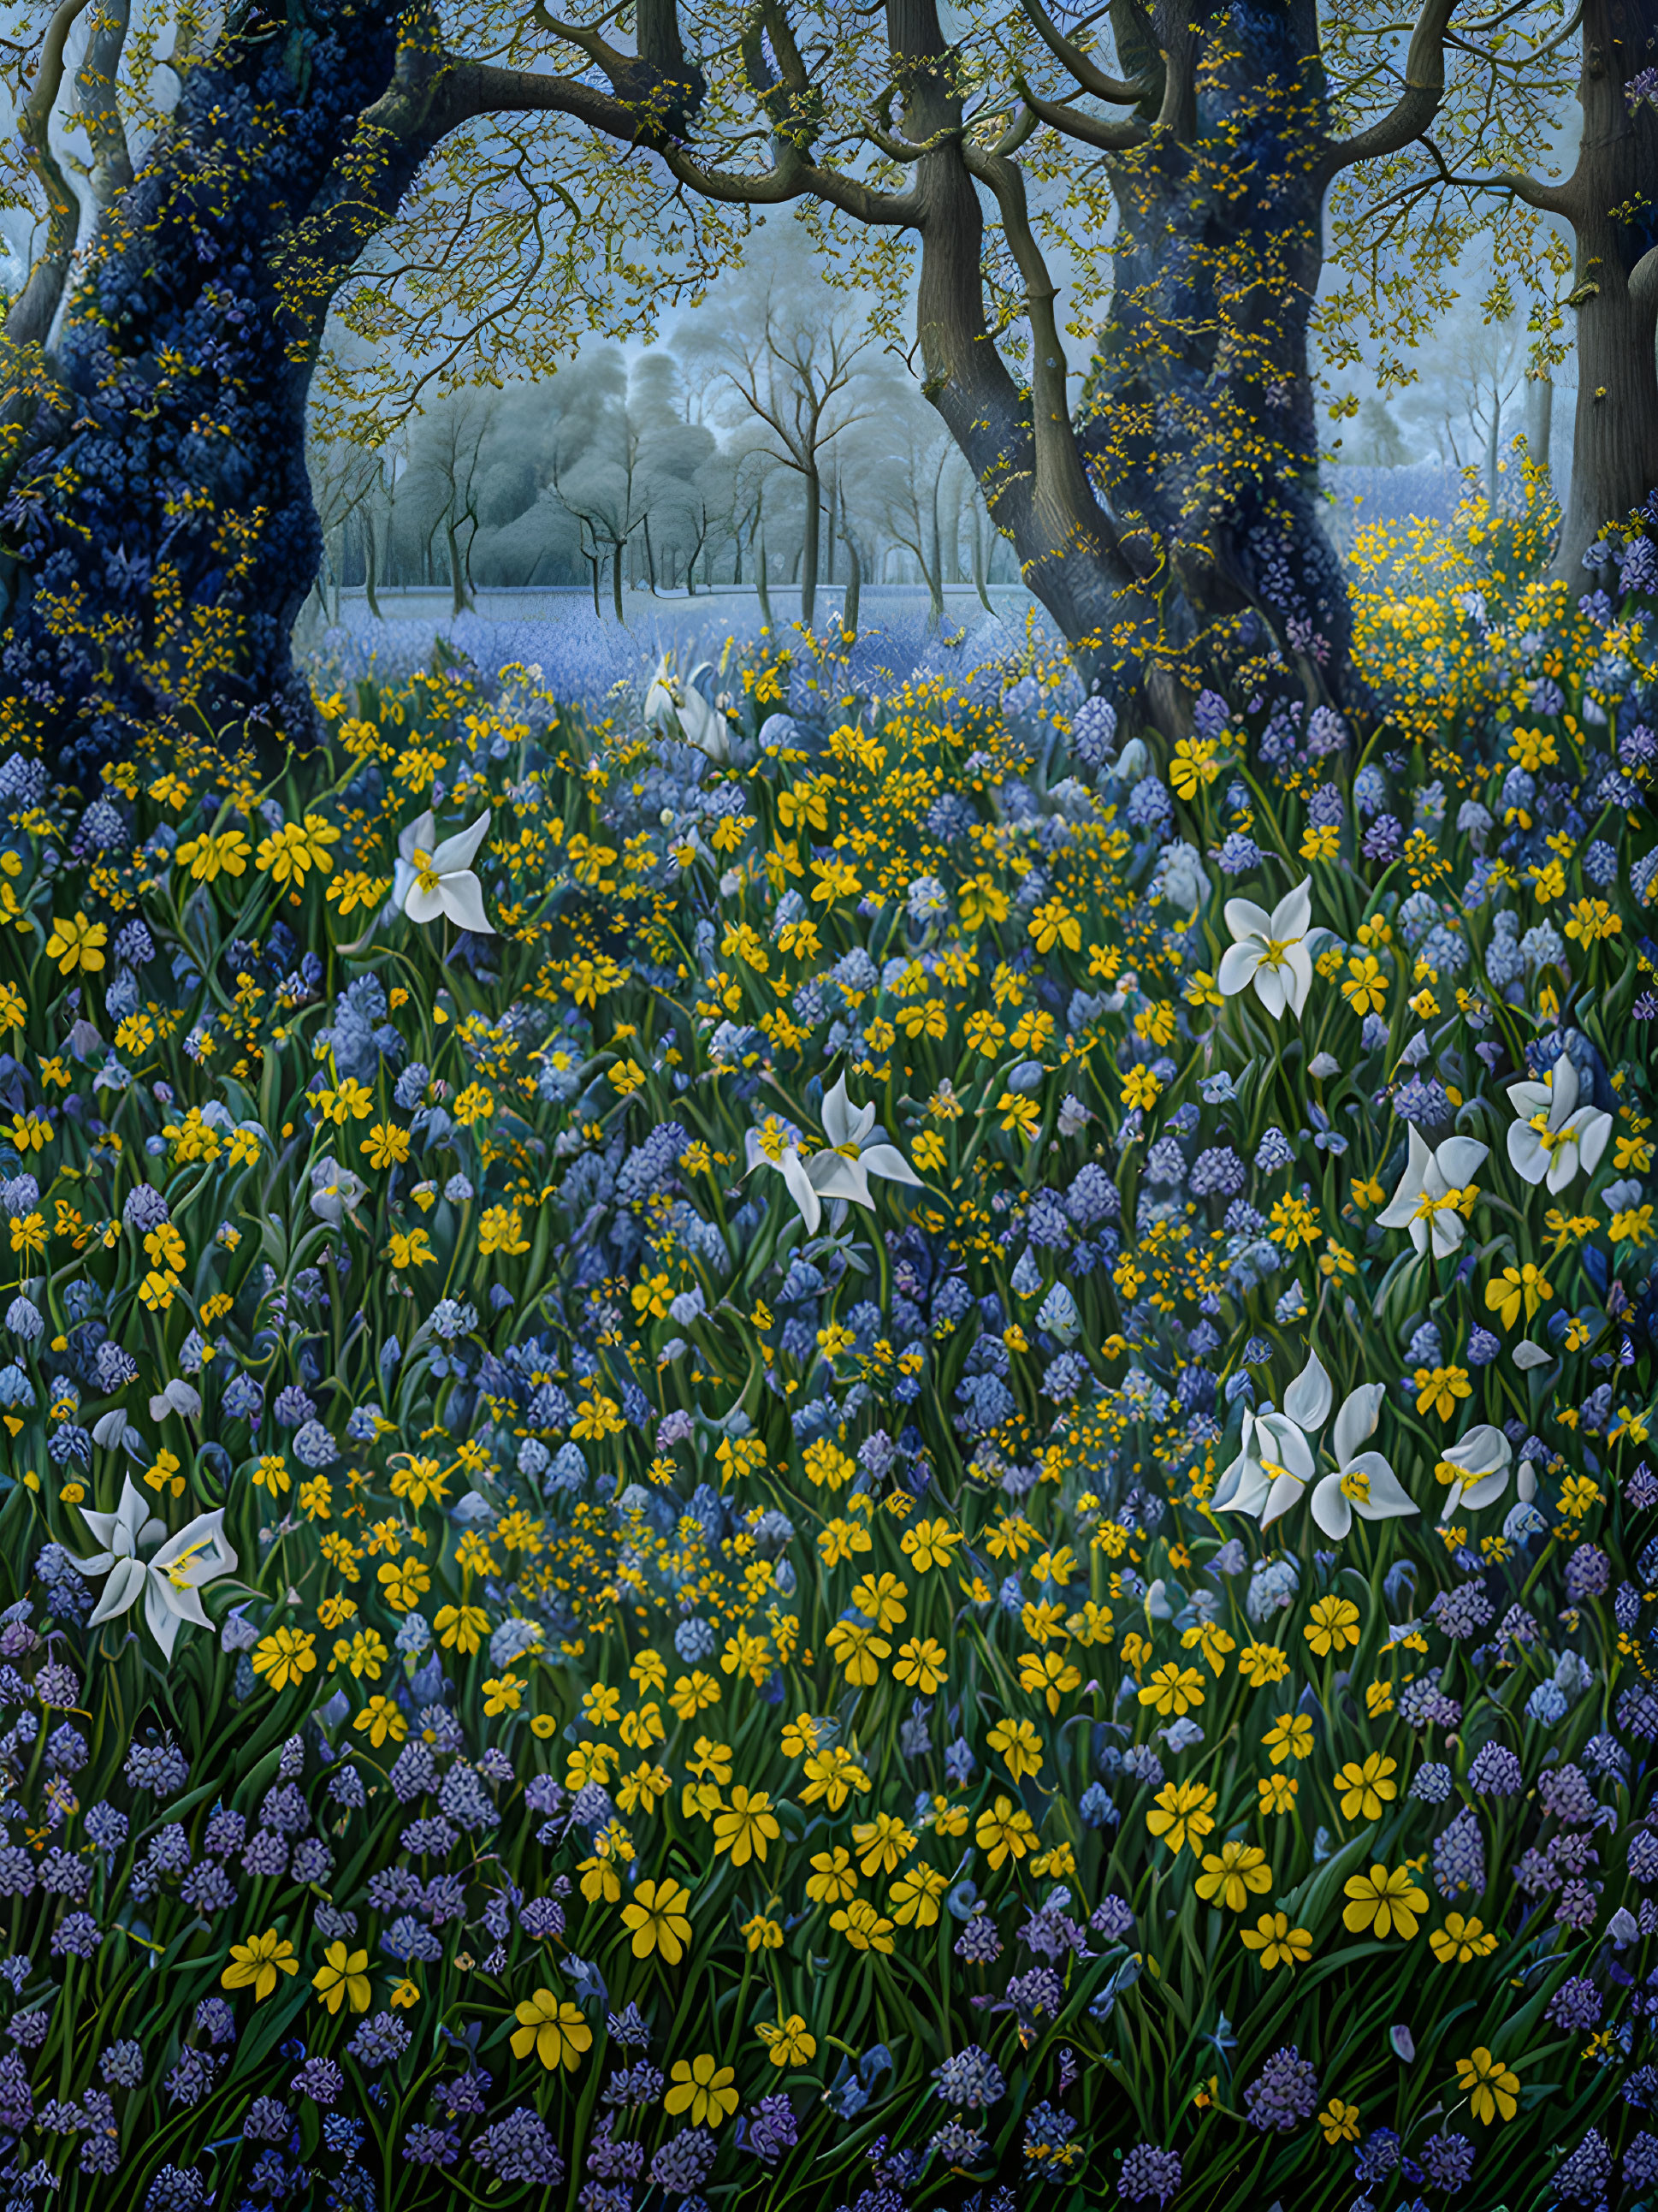 Wildflower Carpet Surrounded by Dark Trees and Misty Background